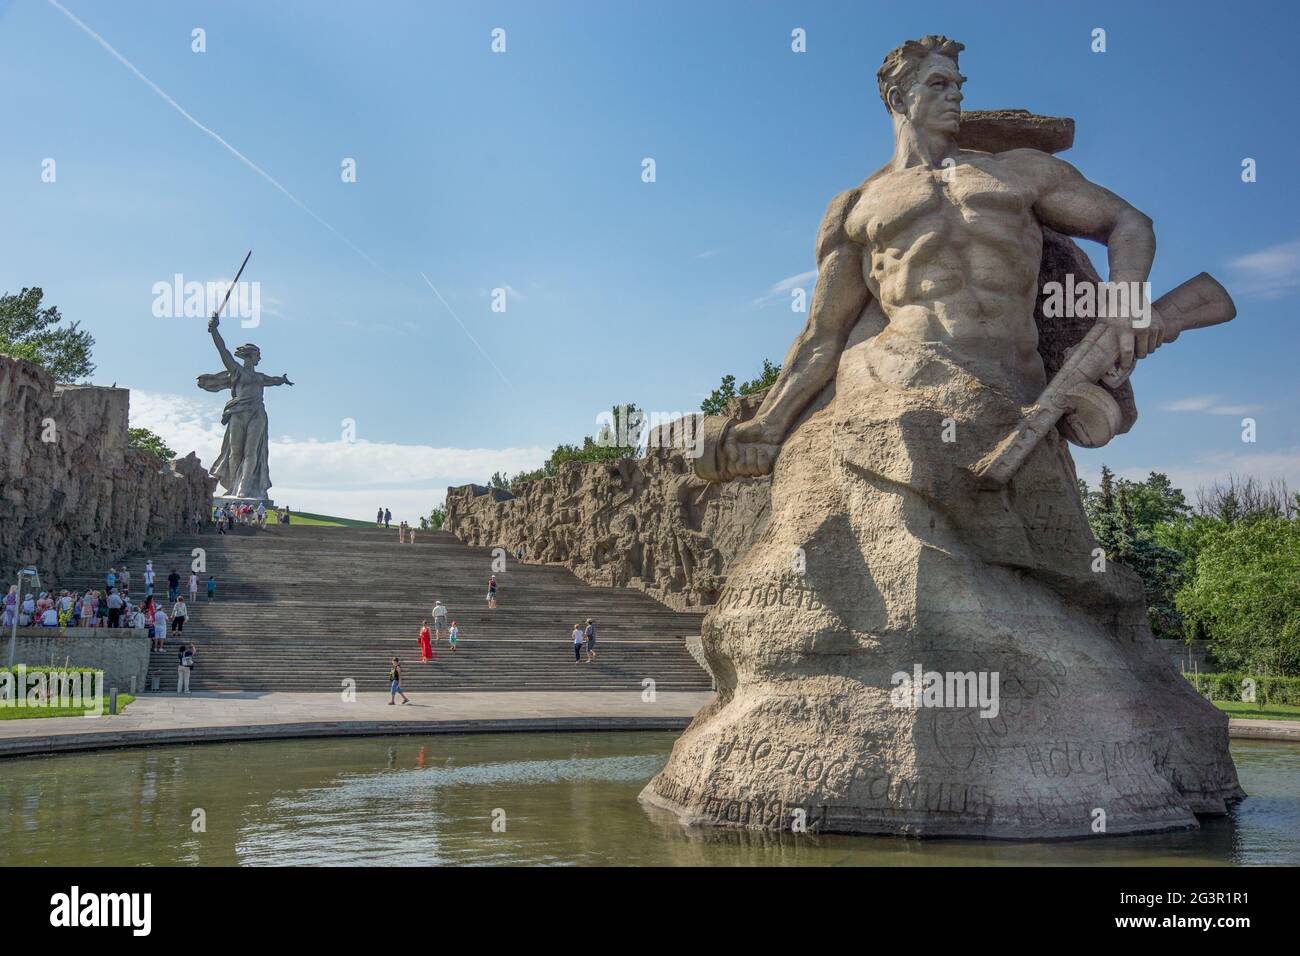 Volgograd/Russia-18.06.2016:The statue of The Motherland Calls on Mamayev Kurgan and soldier statue with gun Stock Photo